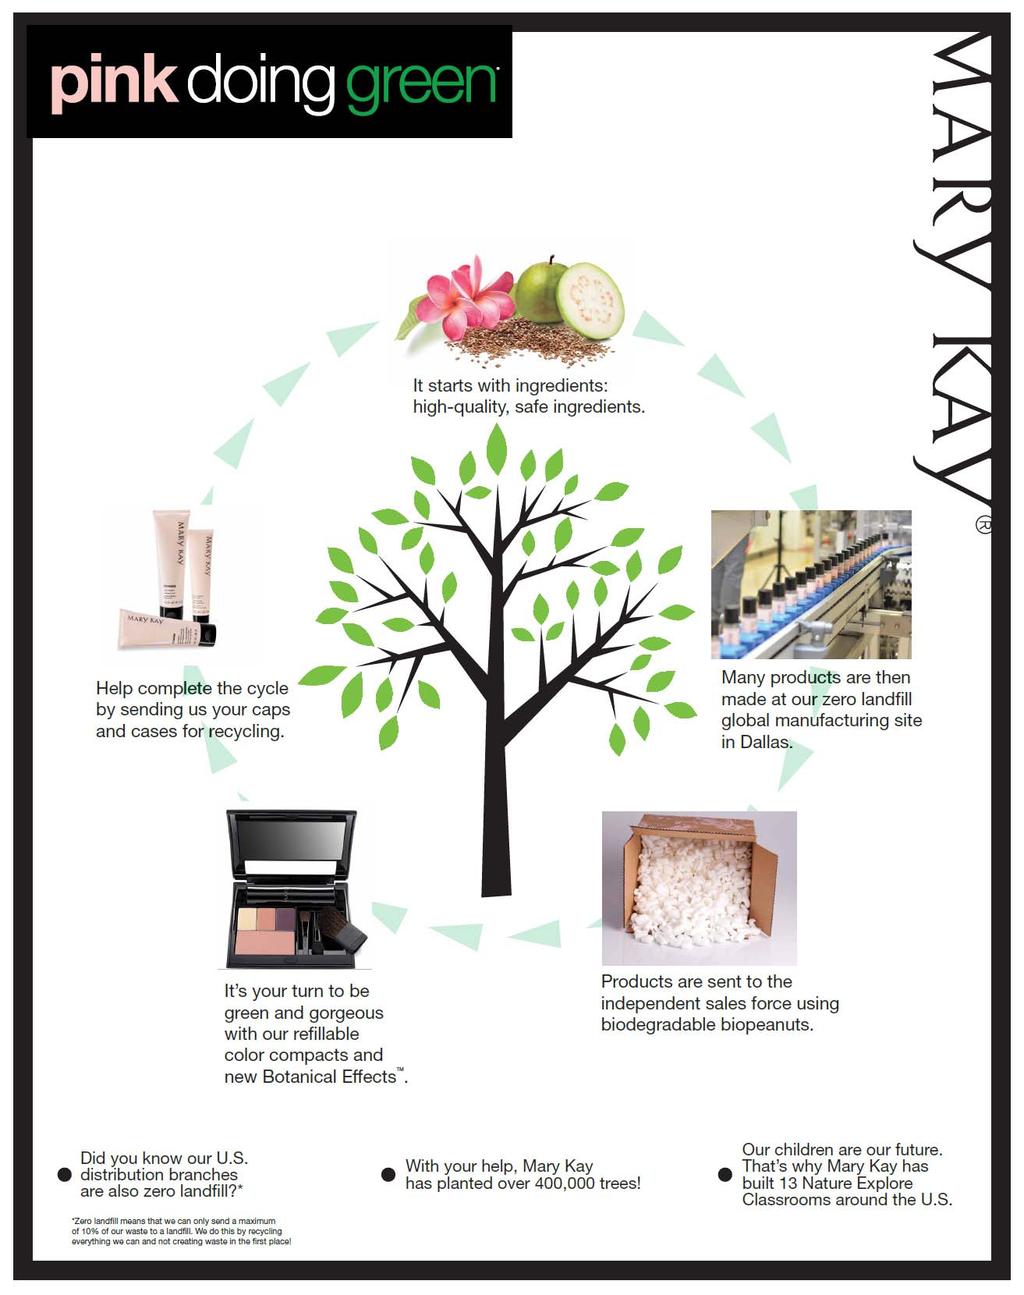 Finally let s look Globally. Did you know that when you wash your face with Mary Kay, there are families impacted all across the globe. There are so many stories, but my favorite is one from China.